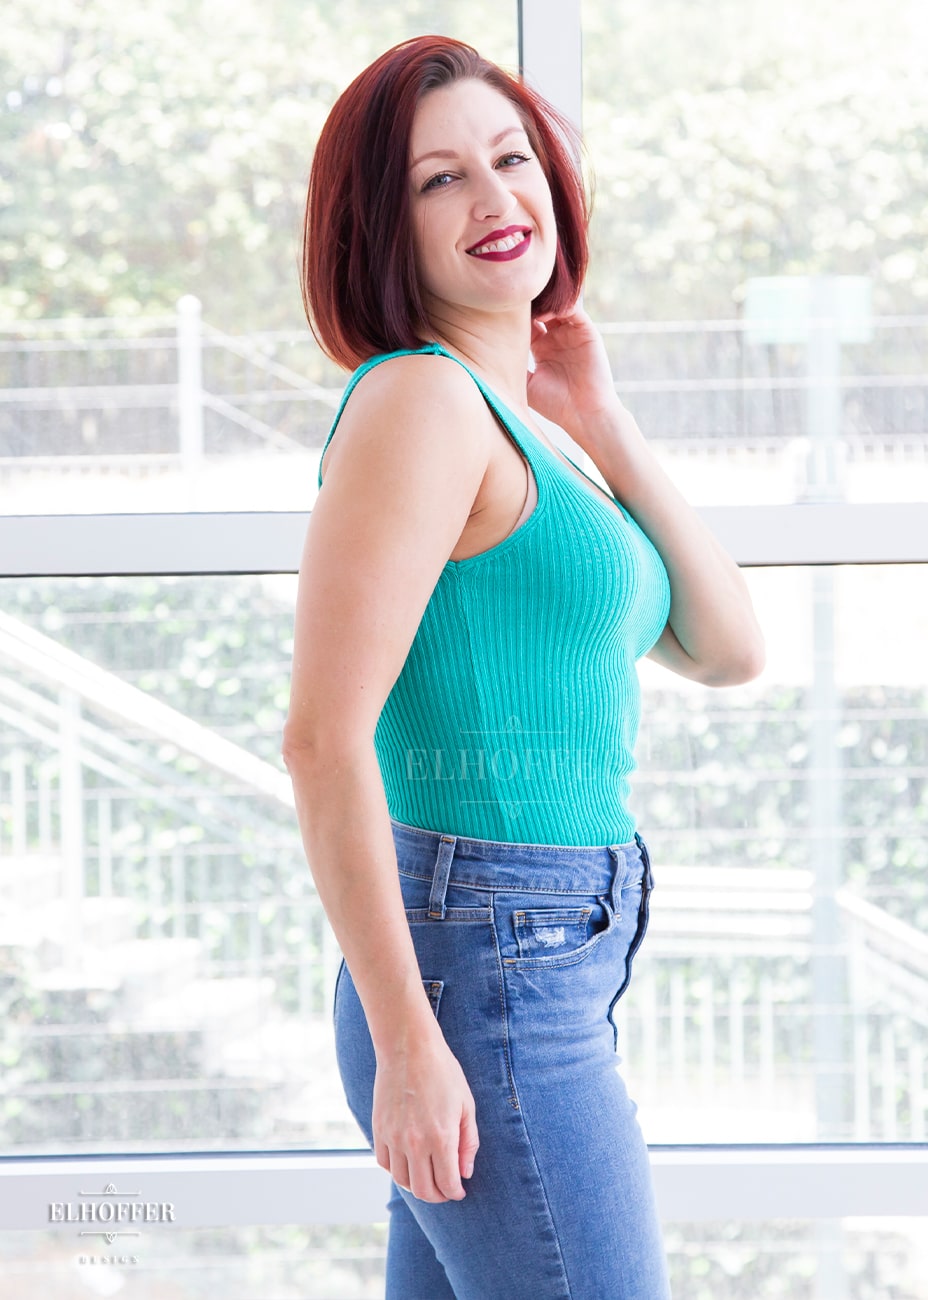 Natalie, a size small fair skinned model with short red hair, is wearing our essential gemini tank in poison green, a light teal. The pullover sleeveless knit tank is meant to be reversible with a shorter and longer V-Neck you can decide how low to go.